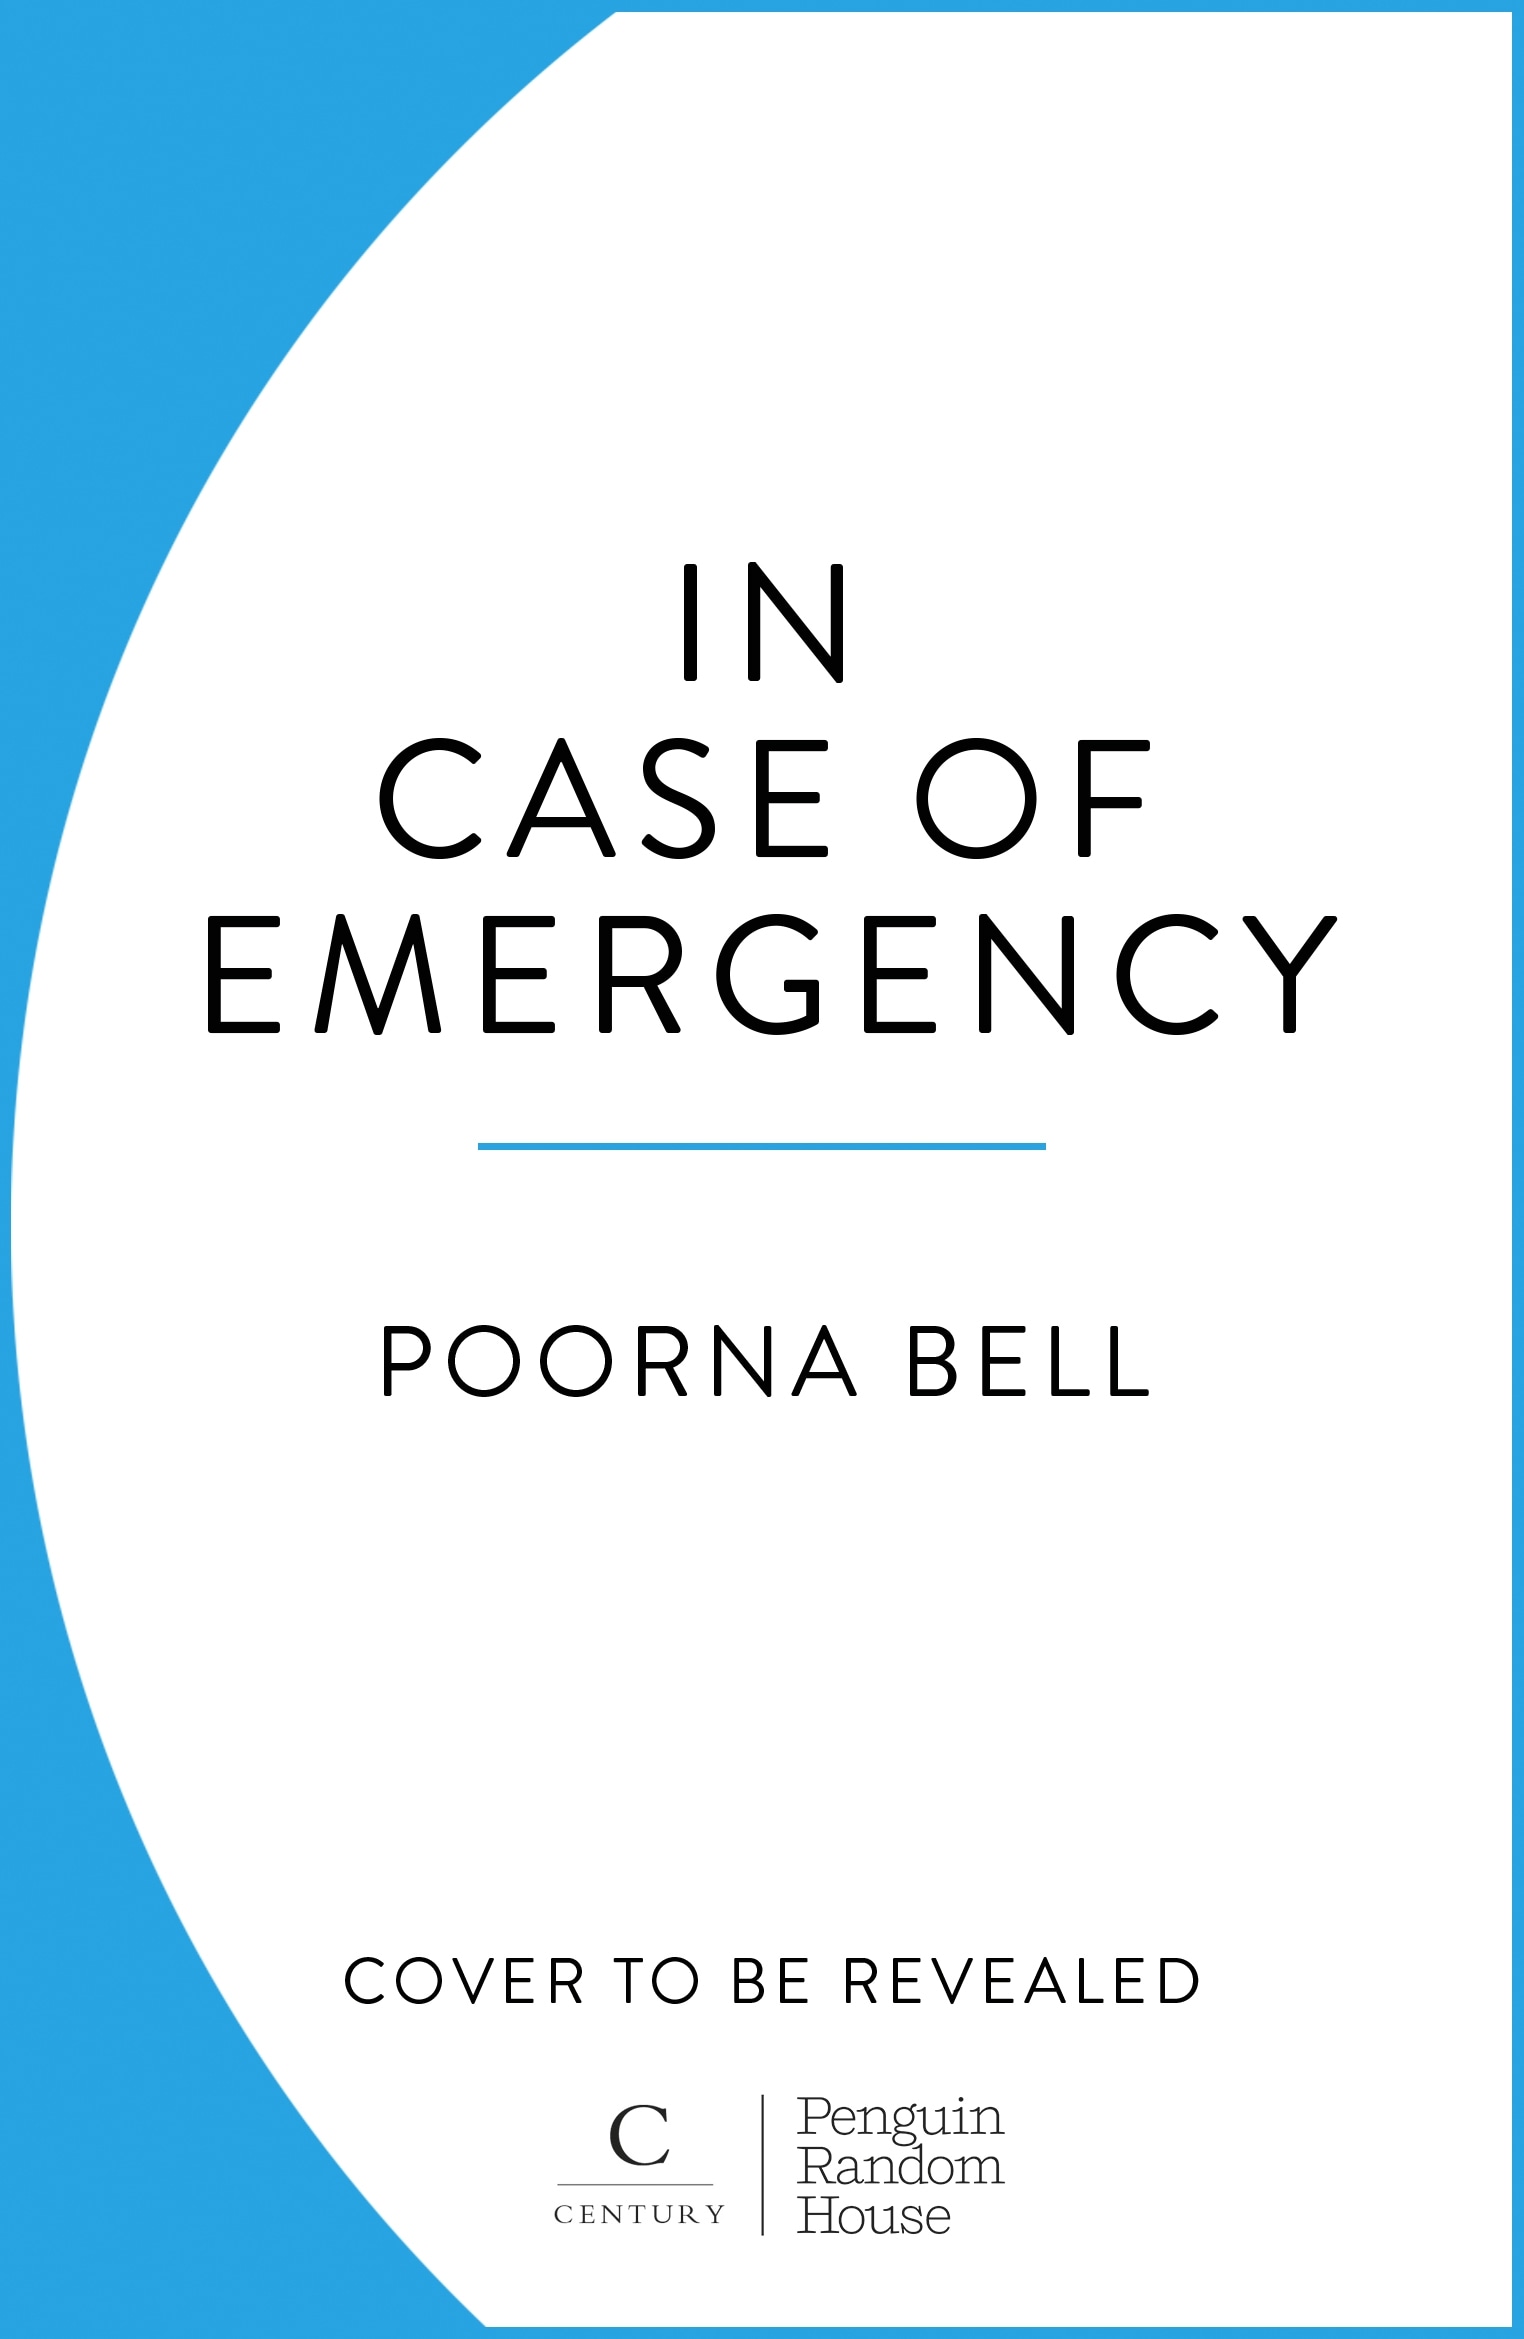 Book “In Case of Emergency” by Poorna Bell — July 7, 2022